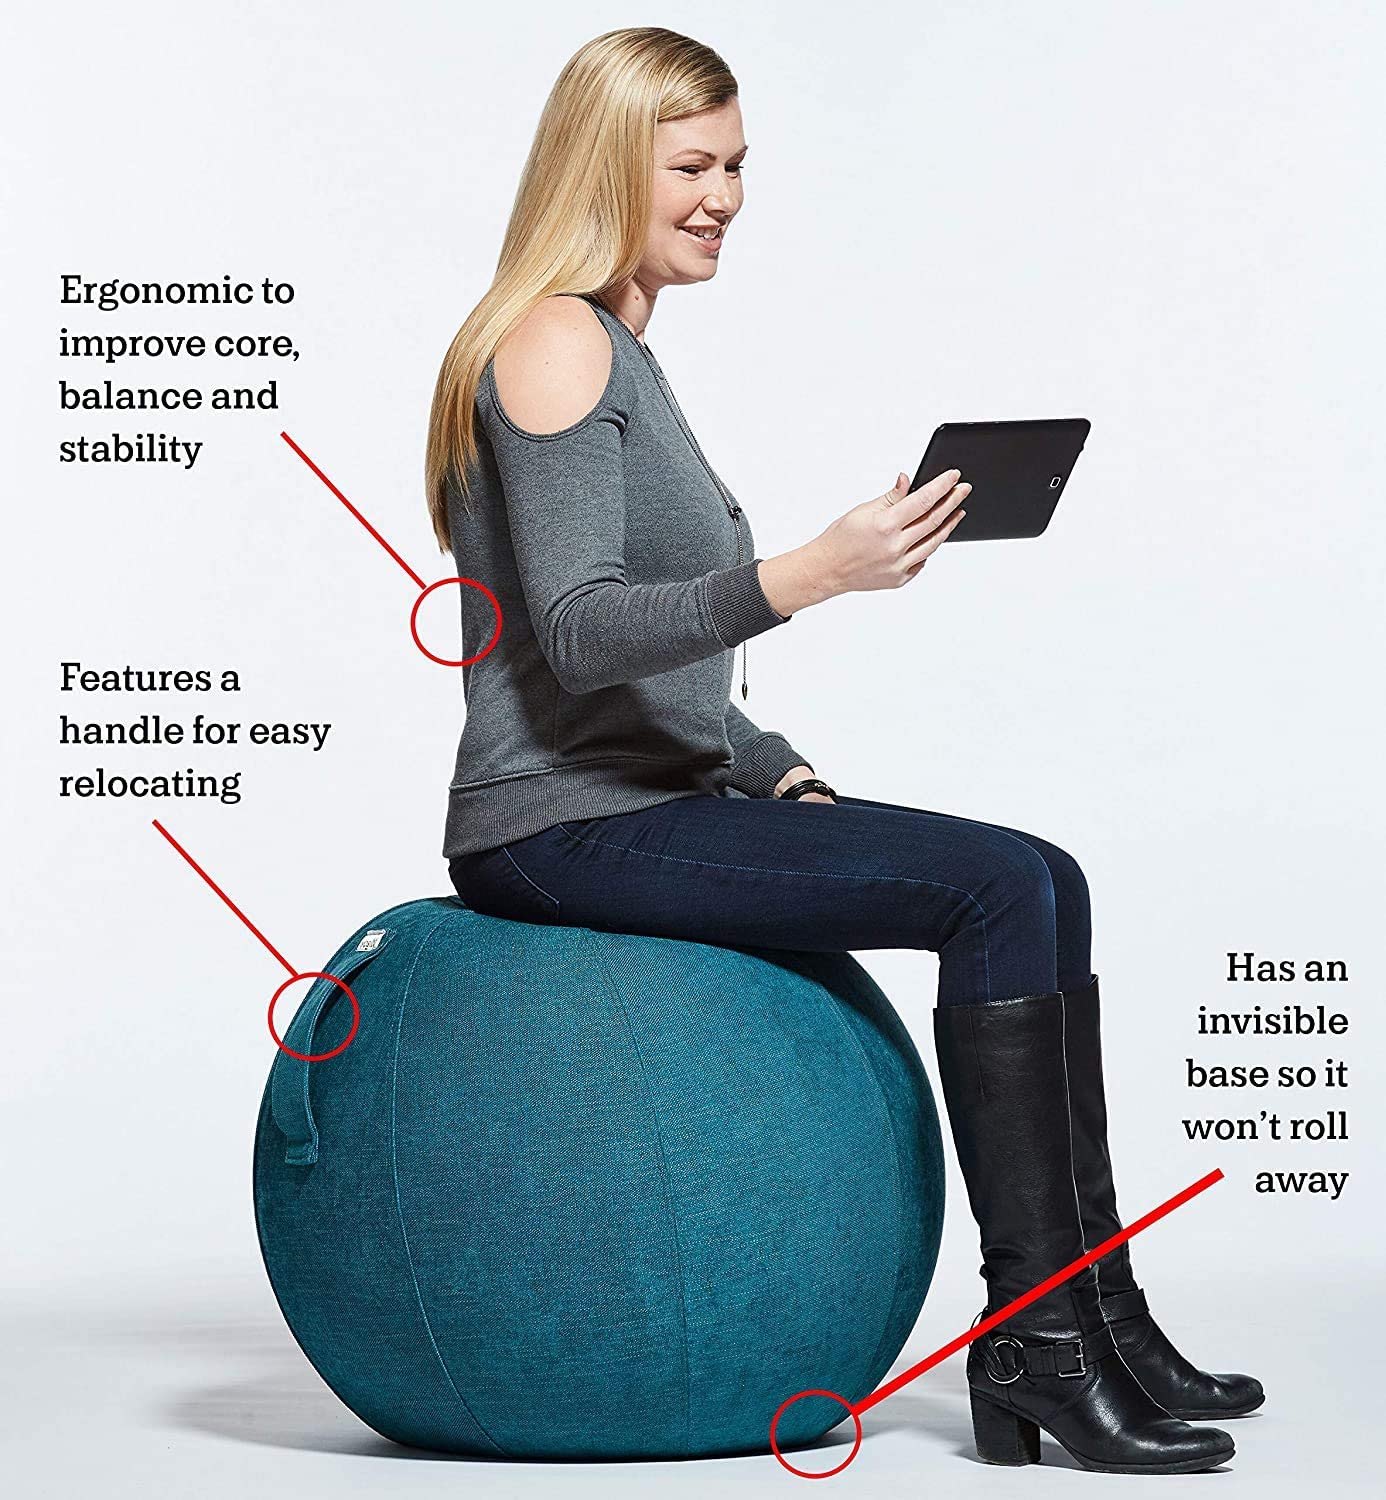 A person with light skin tone and long blonde hair sits on a Blue YogaBo while looking at a tablet. There is a list of benefits for the YogaBo.